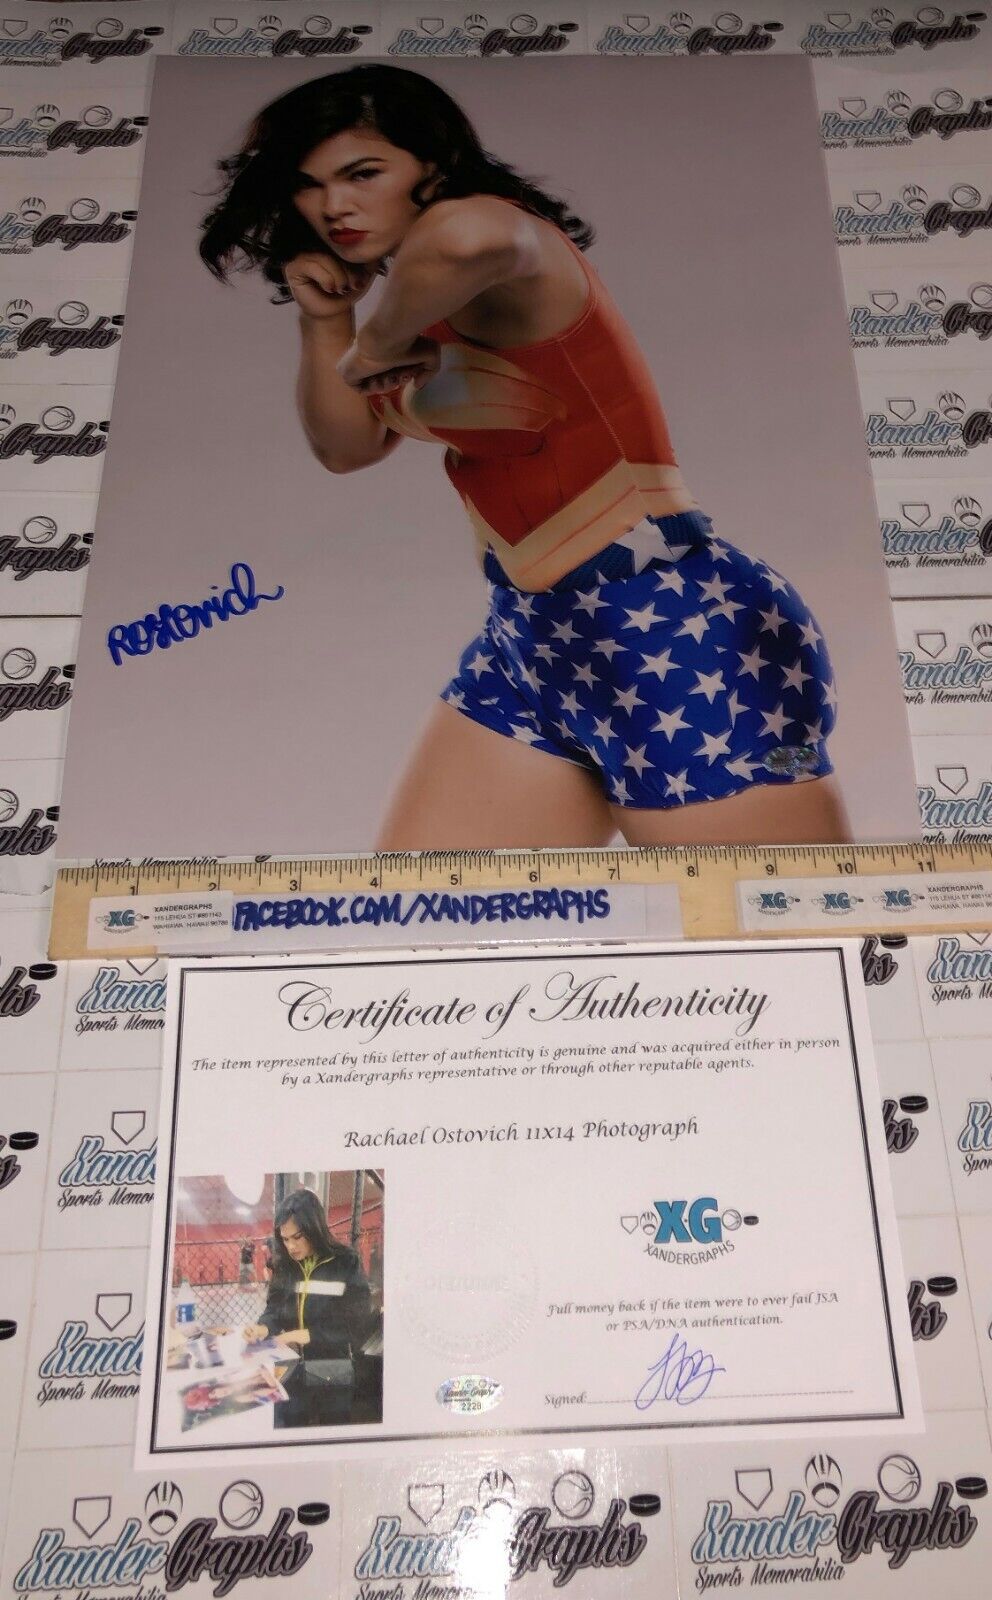 RACHAEL OSTOVICH SIGNED AUTOGRAPHED 11X14 Photo Poster paintingGRAPH MMA UFC-EXACT PROOF COA